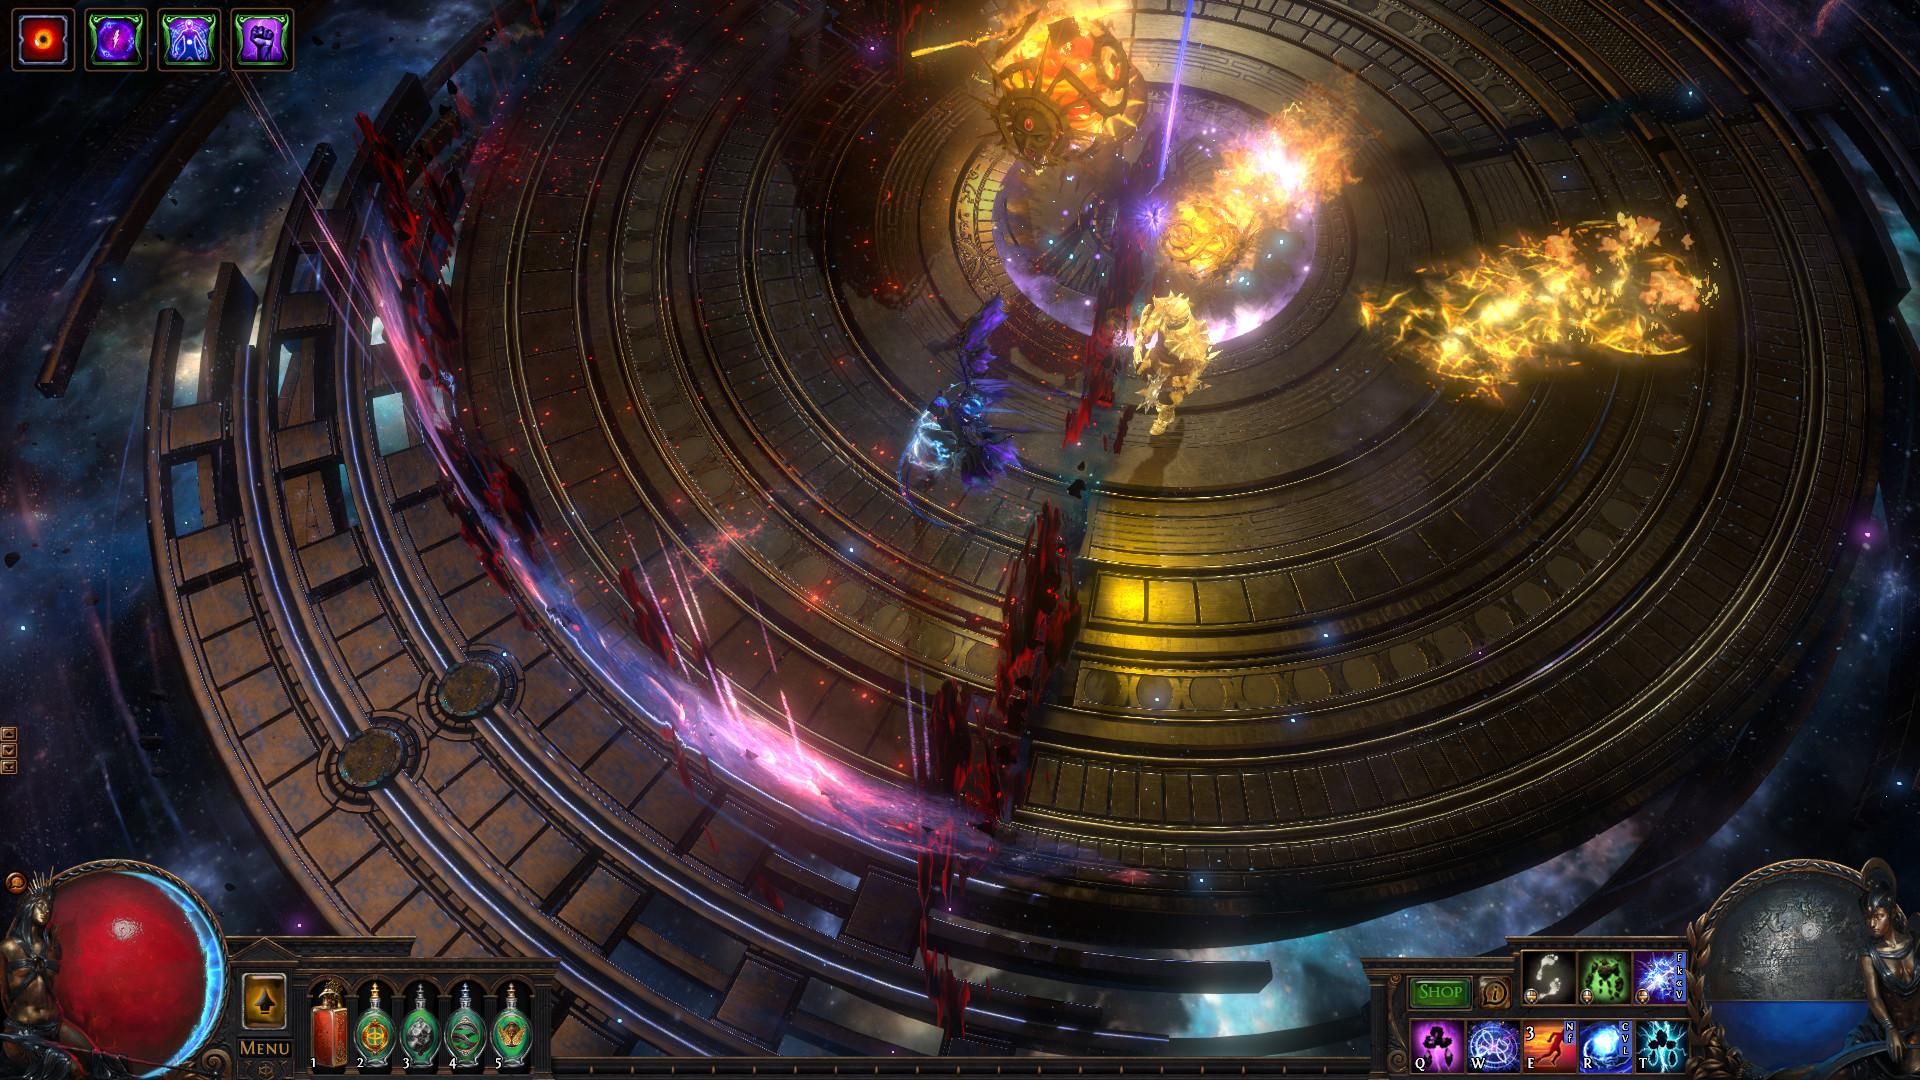 Screenshot №5 from game Path of Exile